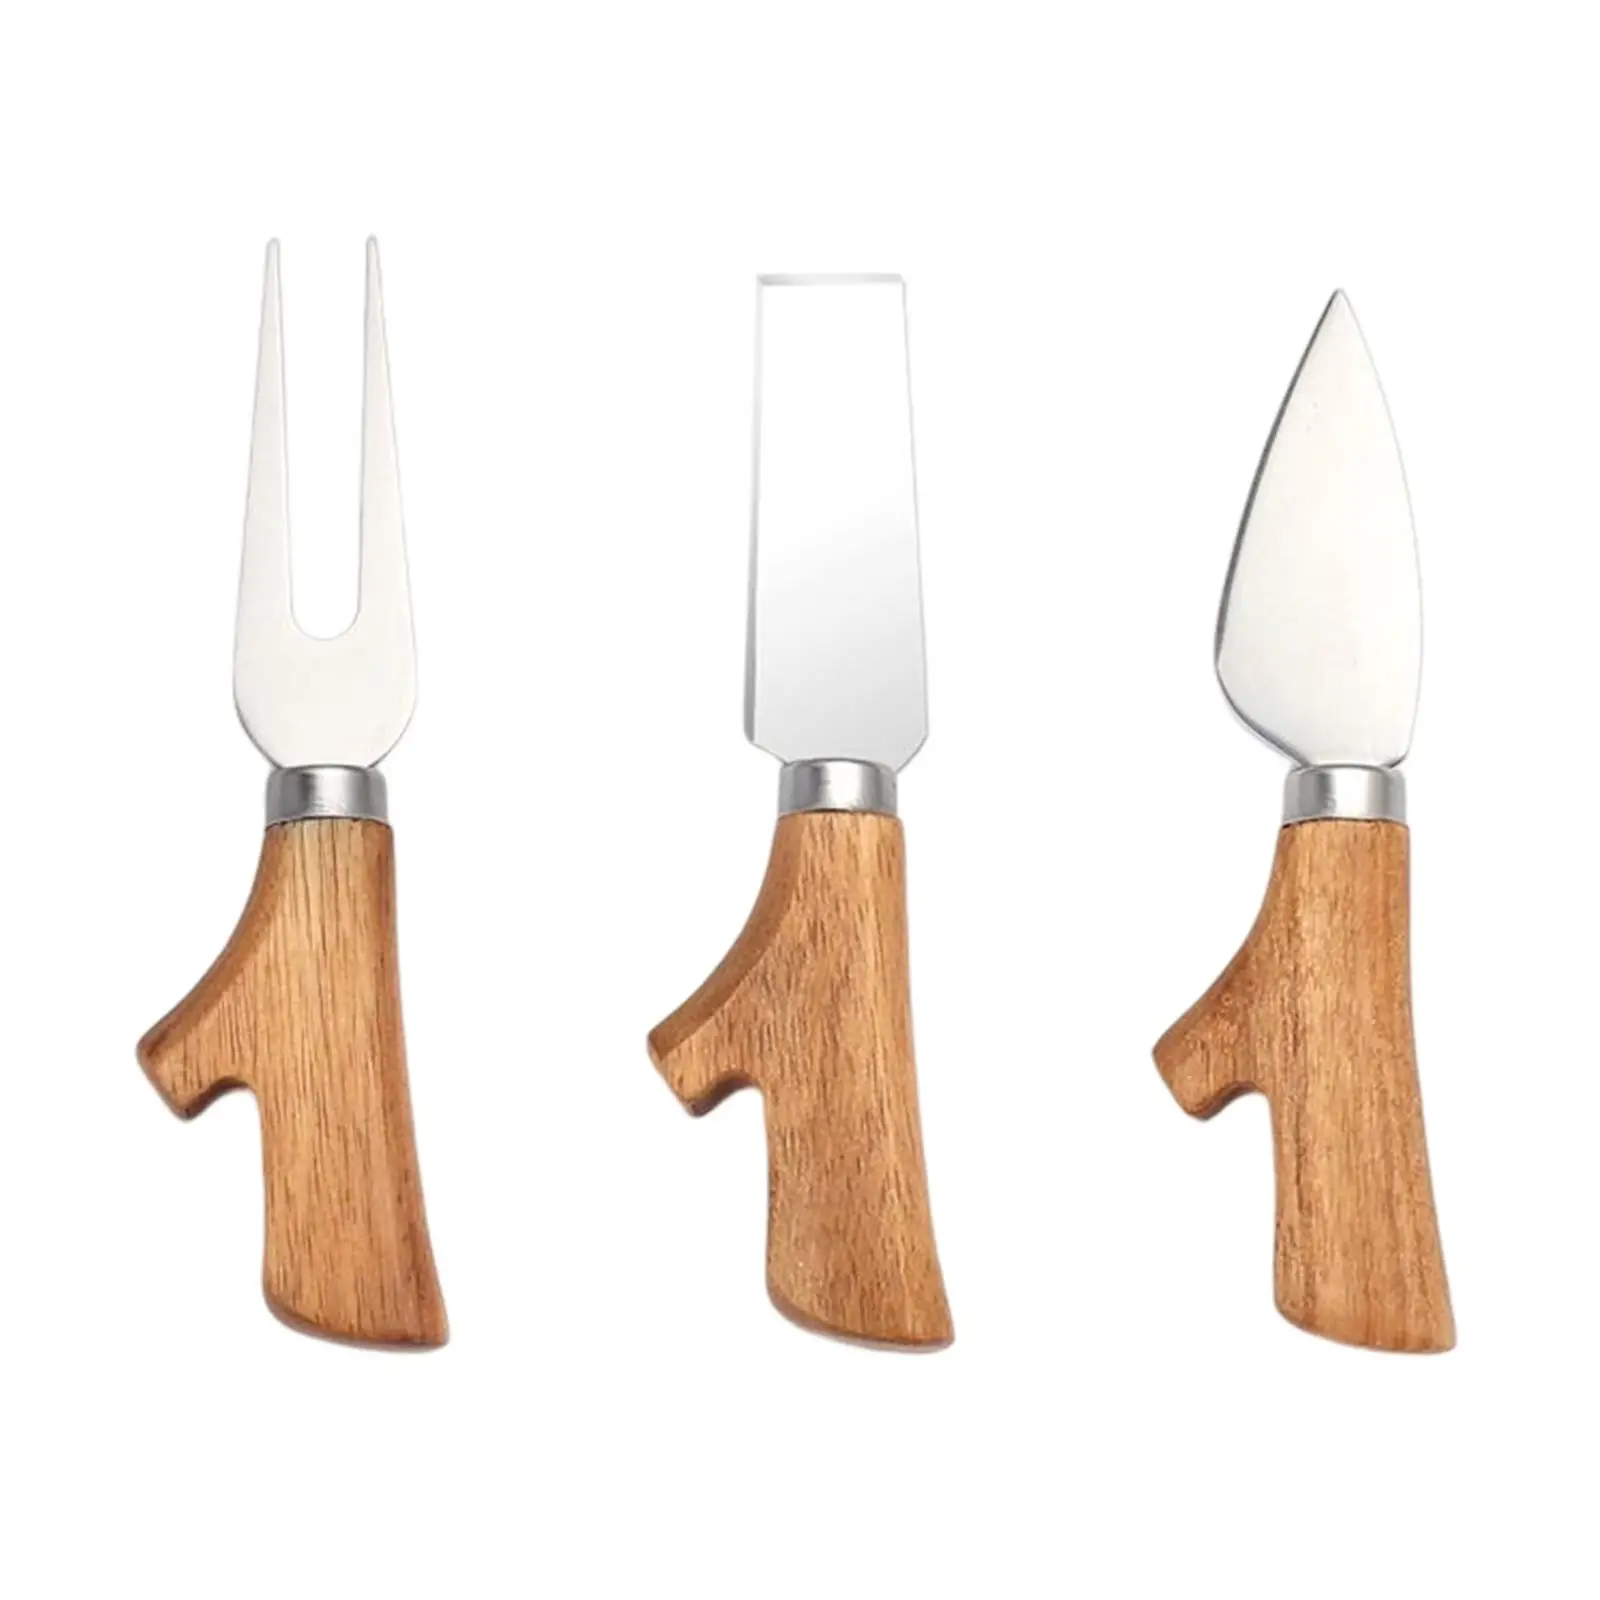 3 Pieces Cheese Knife Kit Wood Handle Easily clean for Bakery Kitchen Utensils